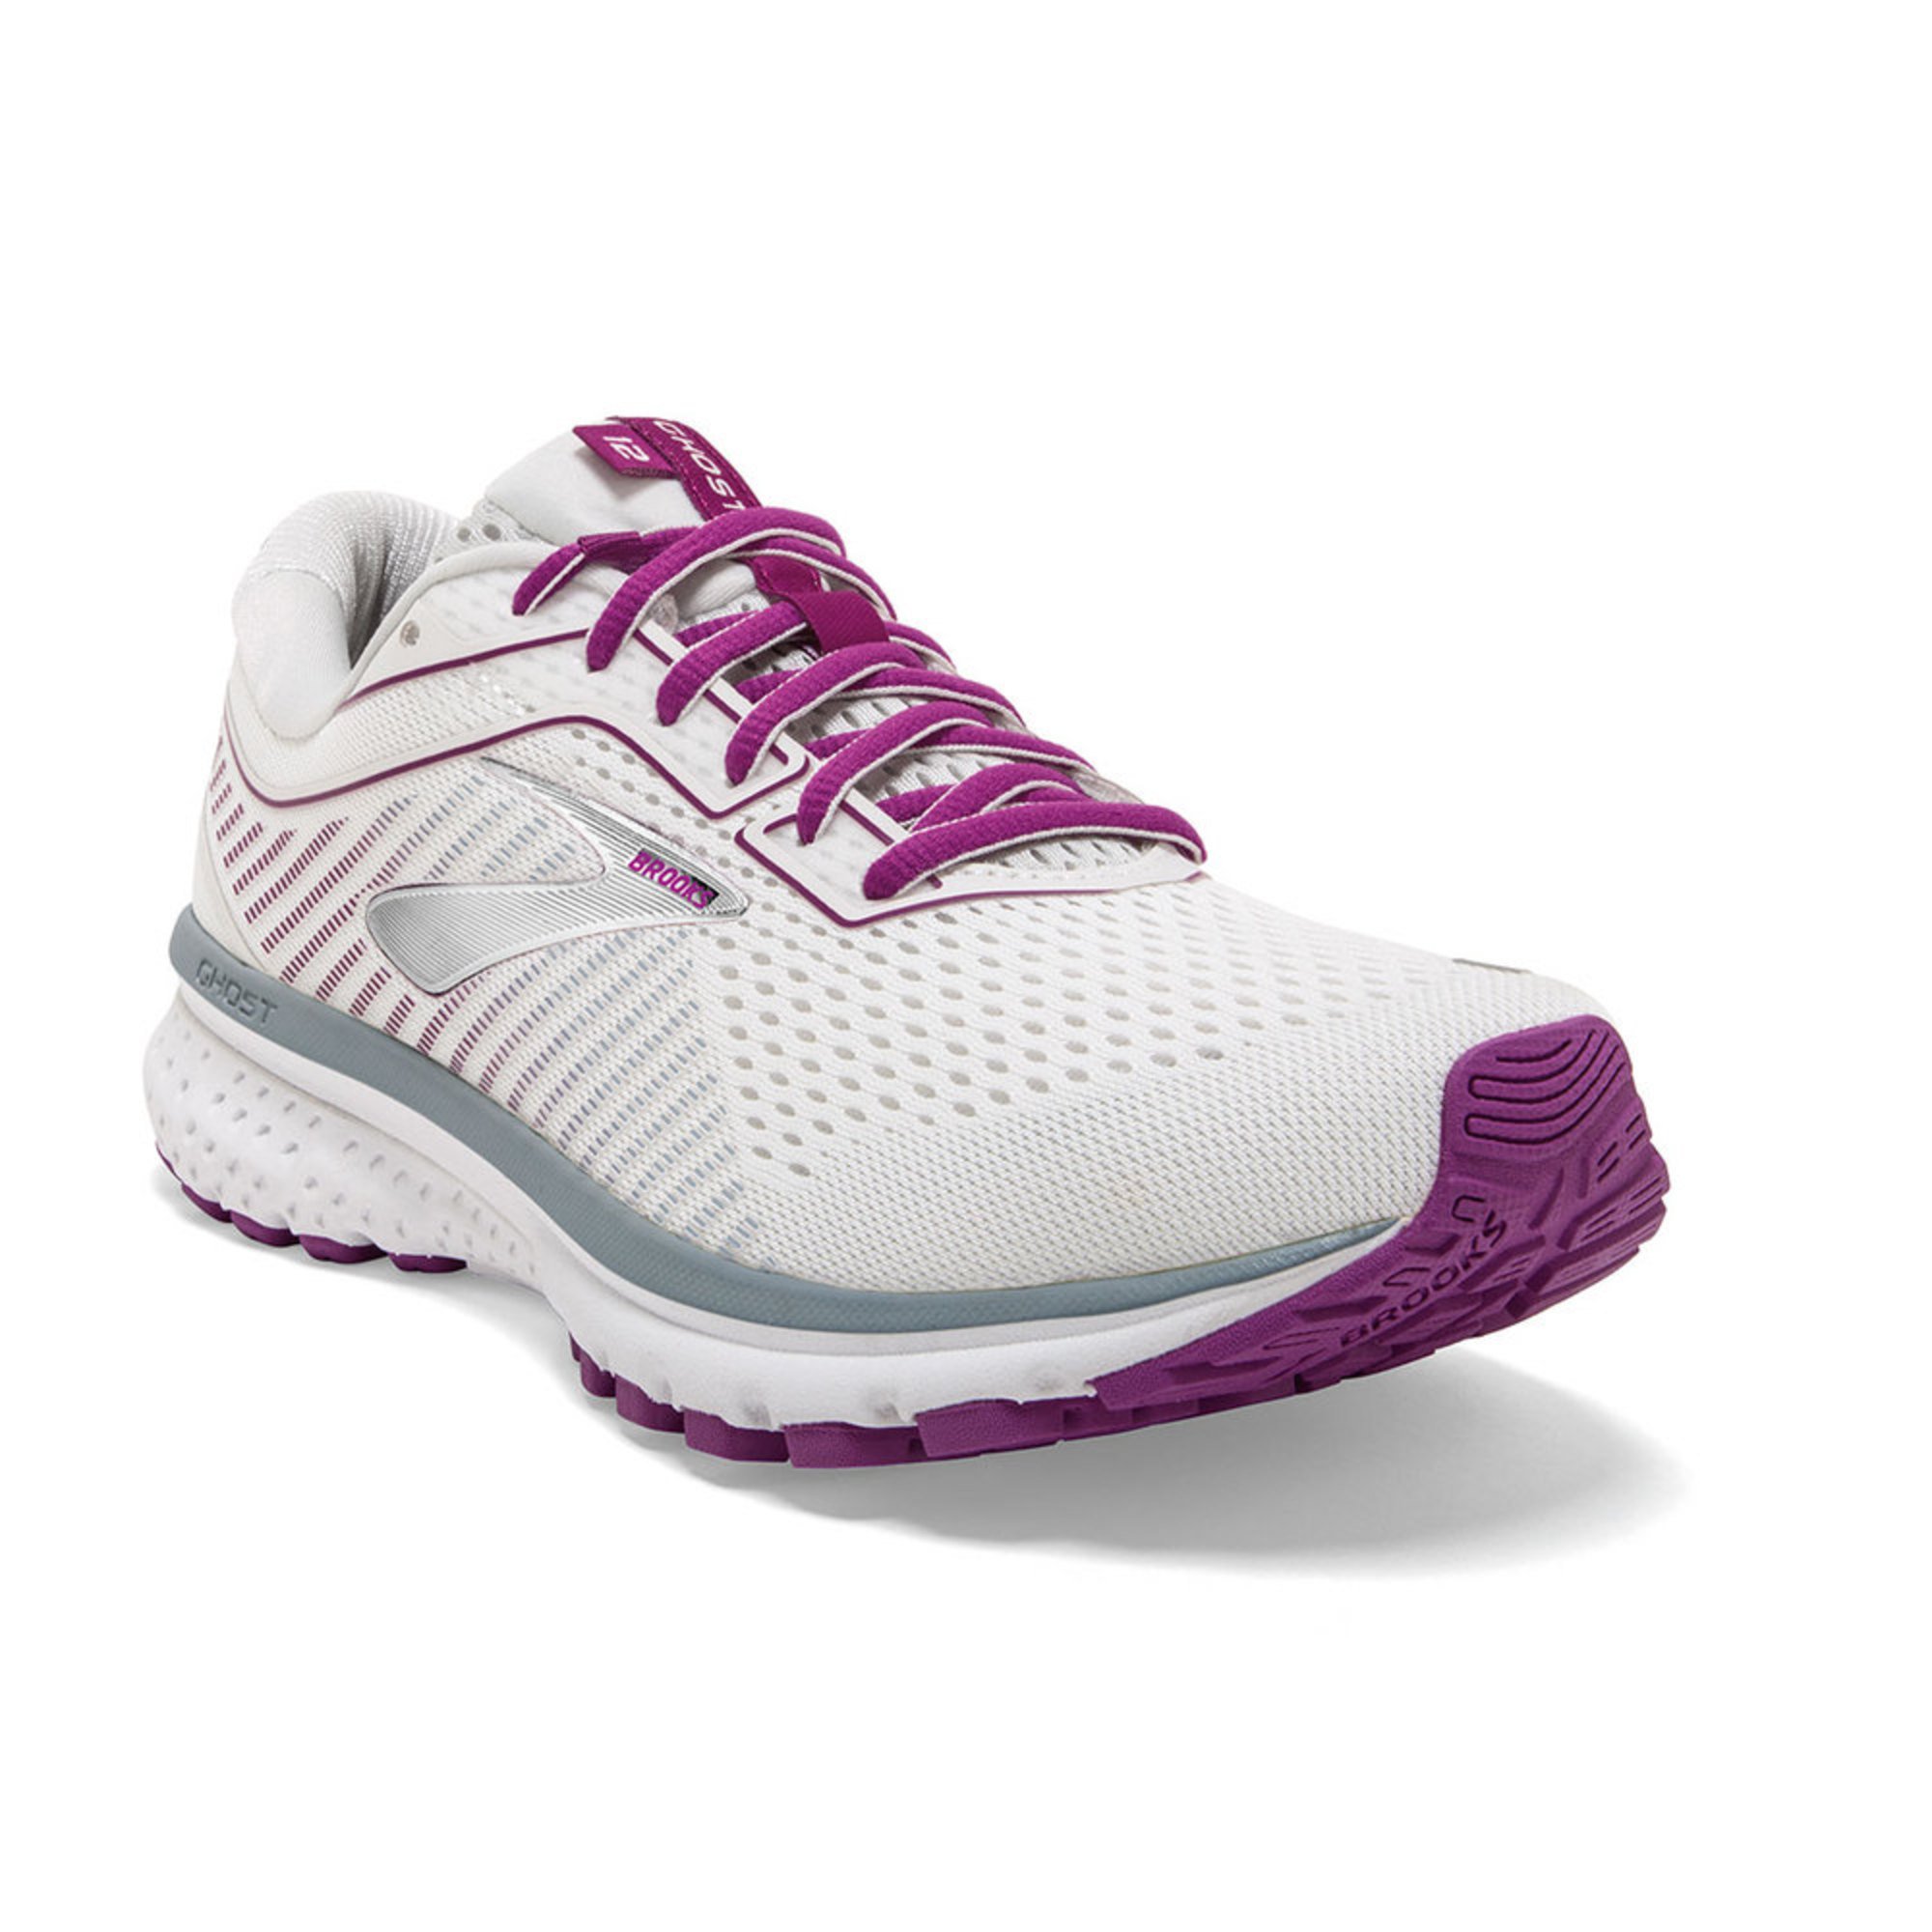 brooks running shoes ghost 12